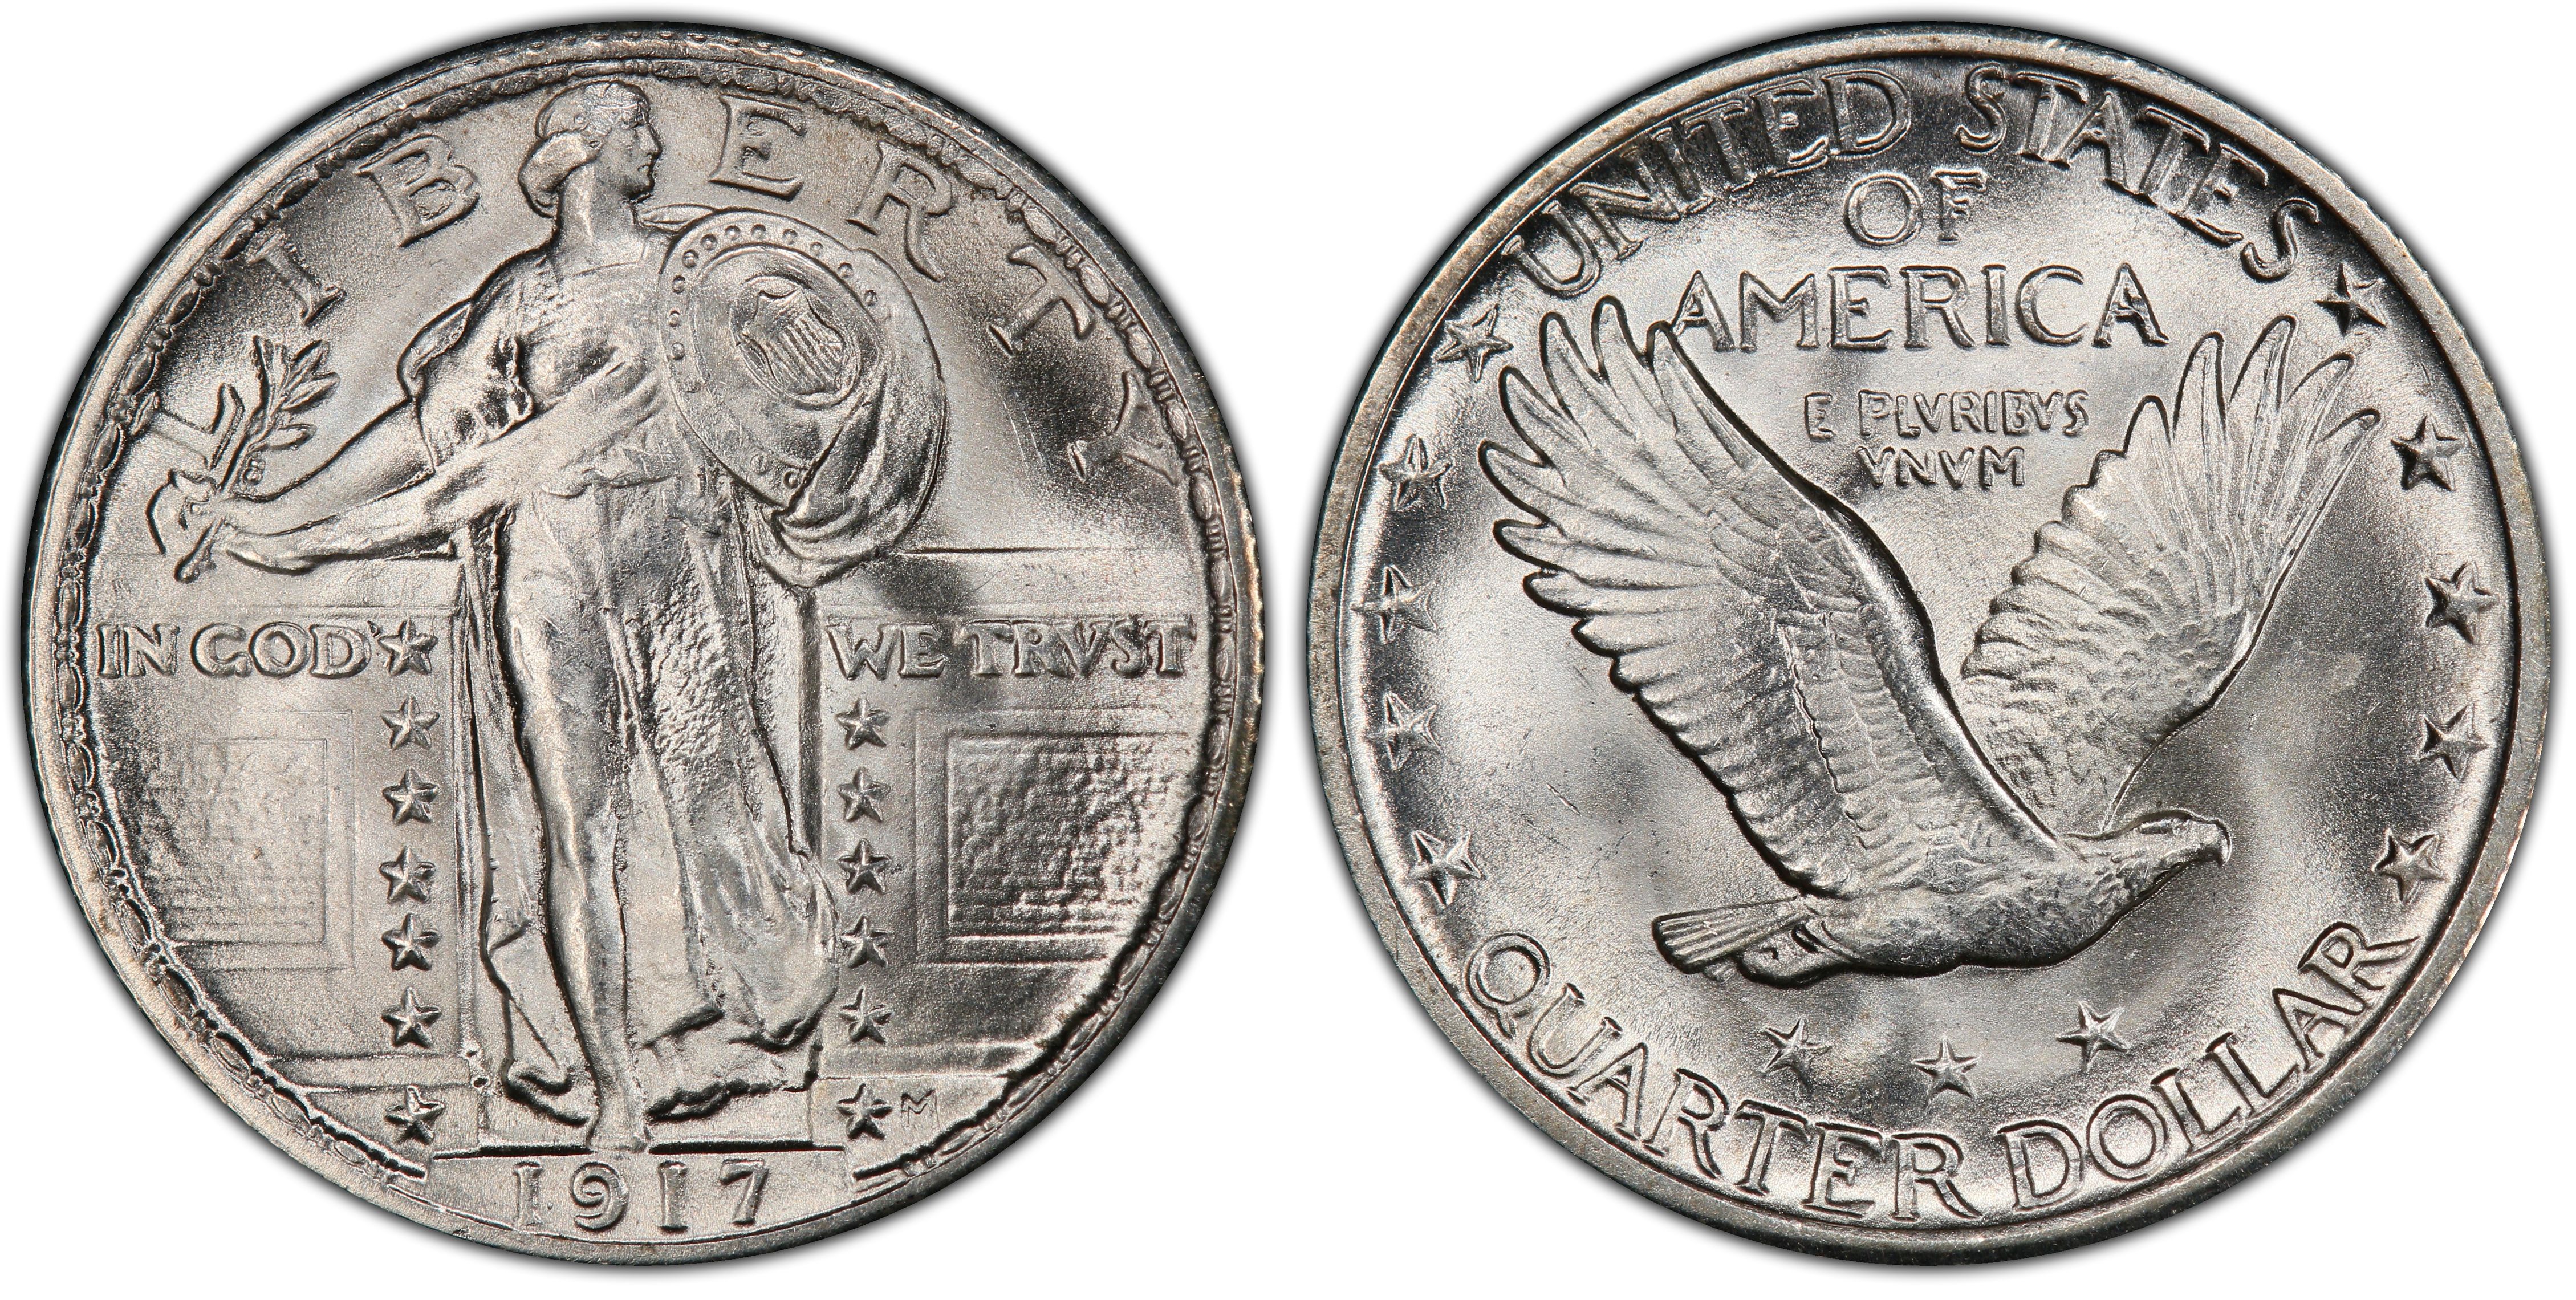 Details about   1917 Standing Liberty Quarter 2 oz Silver Type II BU Round USA Made Bullion Coin 